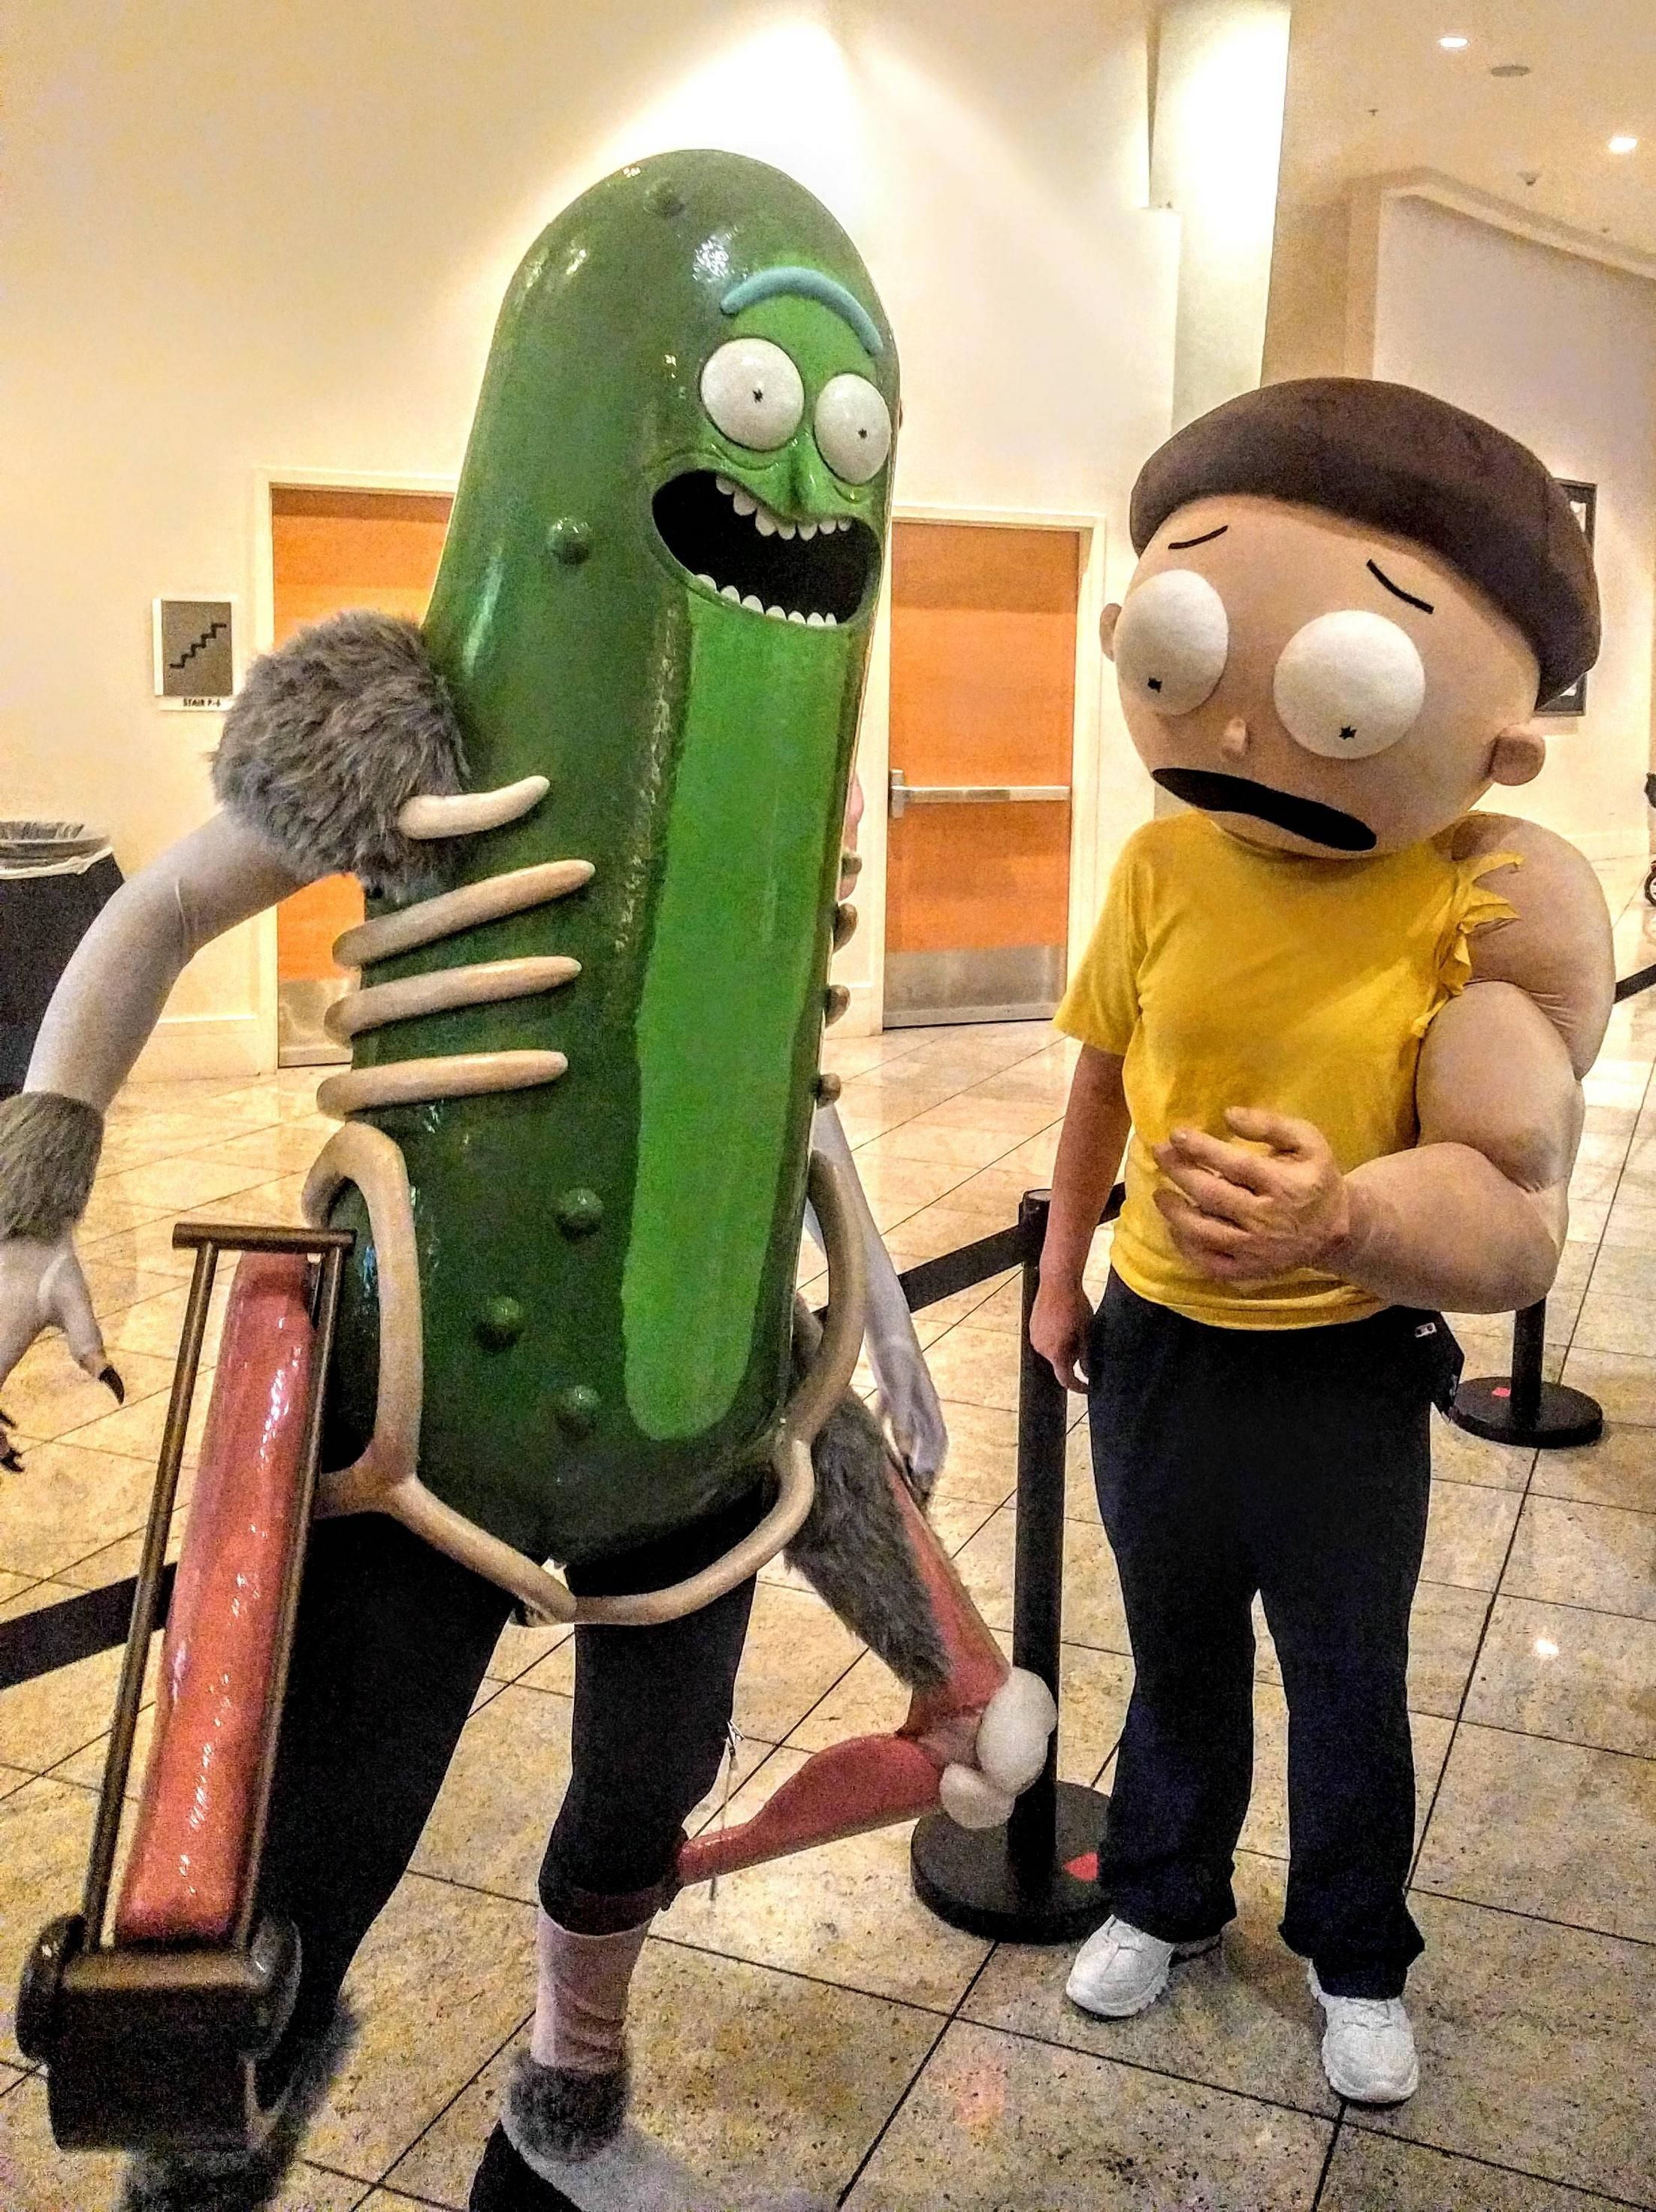 The Mortiest Morty and the Pickliest Rick! DragonCon 2017